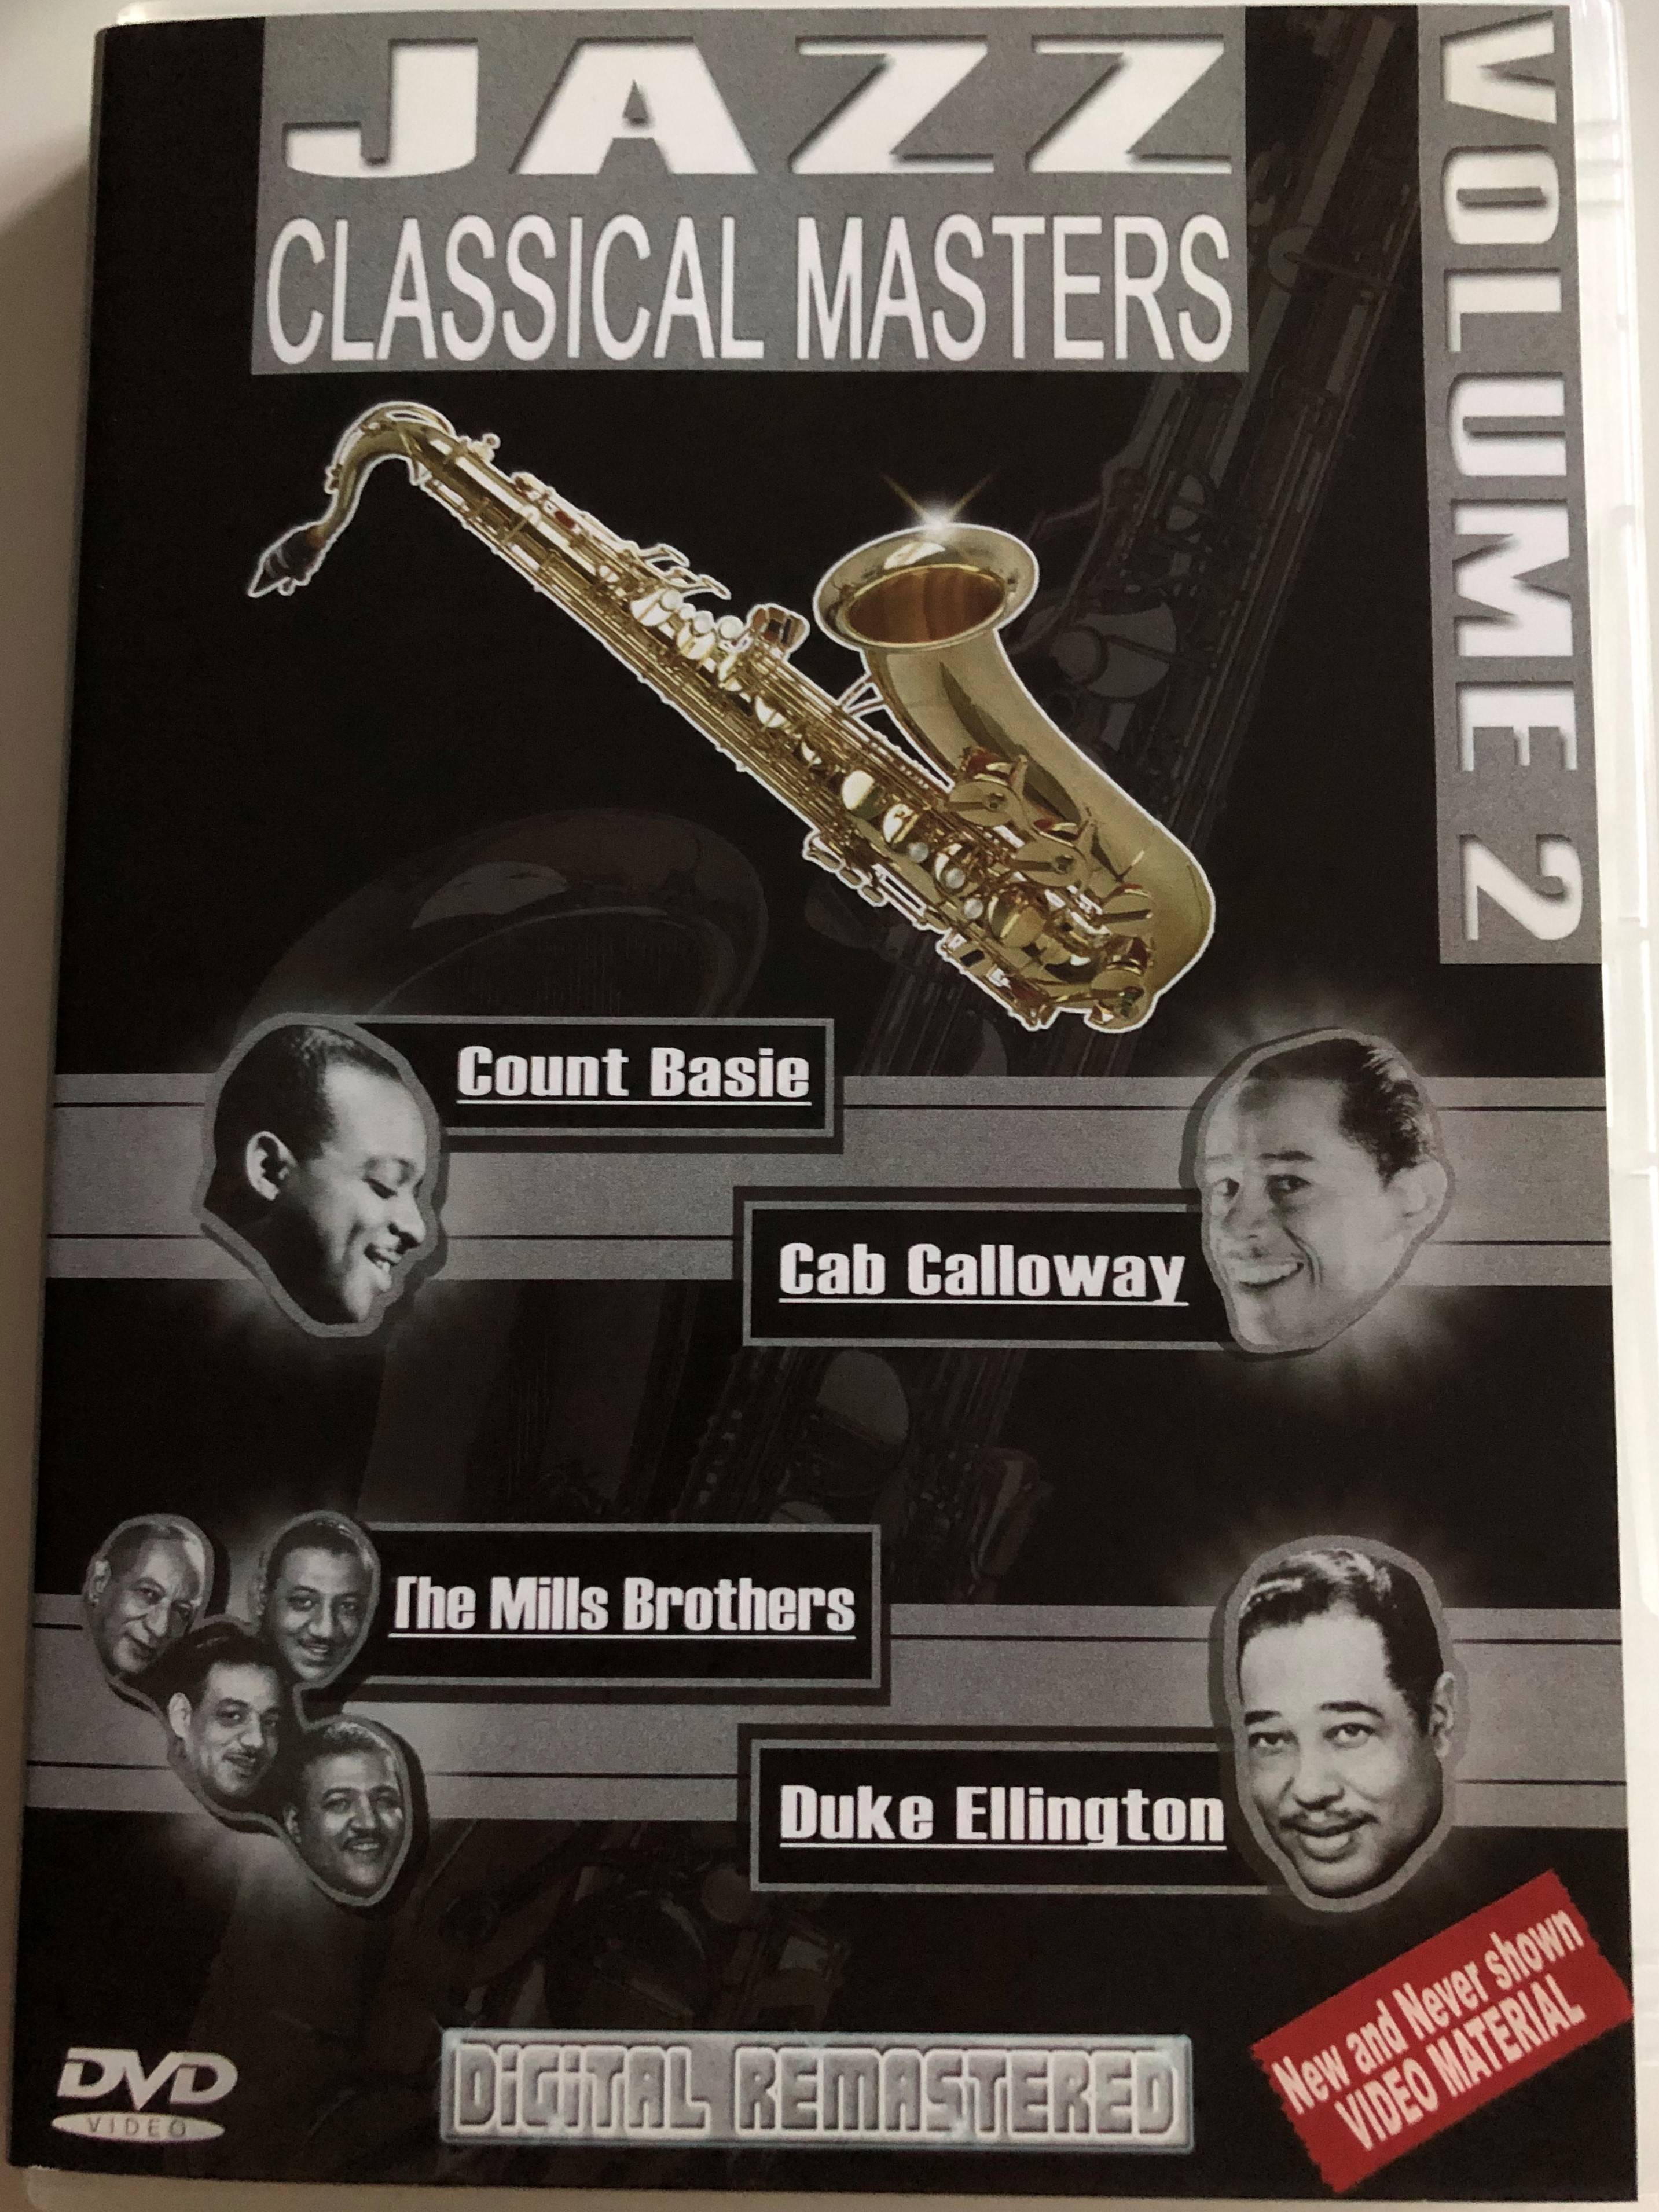 jazz-classical-masters-vol.-2-dvd-count-basie-cab-calloway-the-mills-brothers-duke-ellington-digitally-remastered-1-.jpg